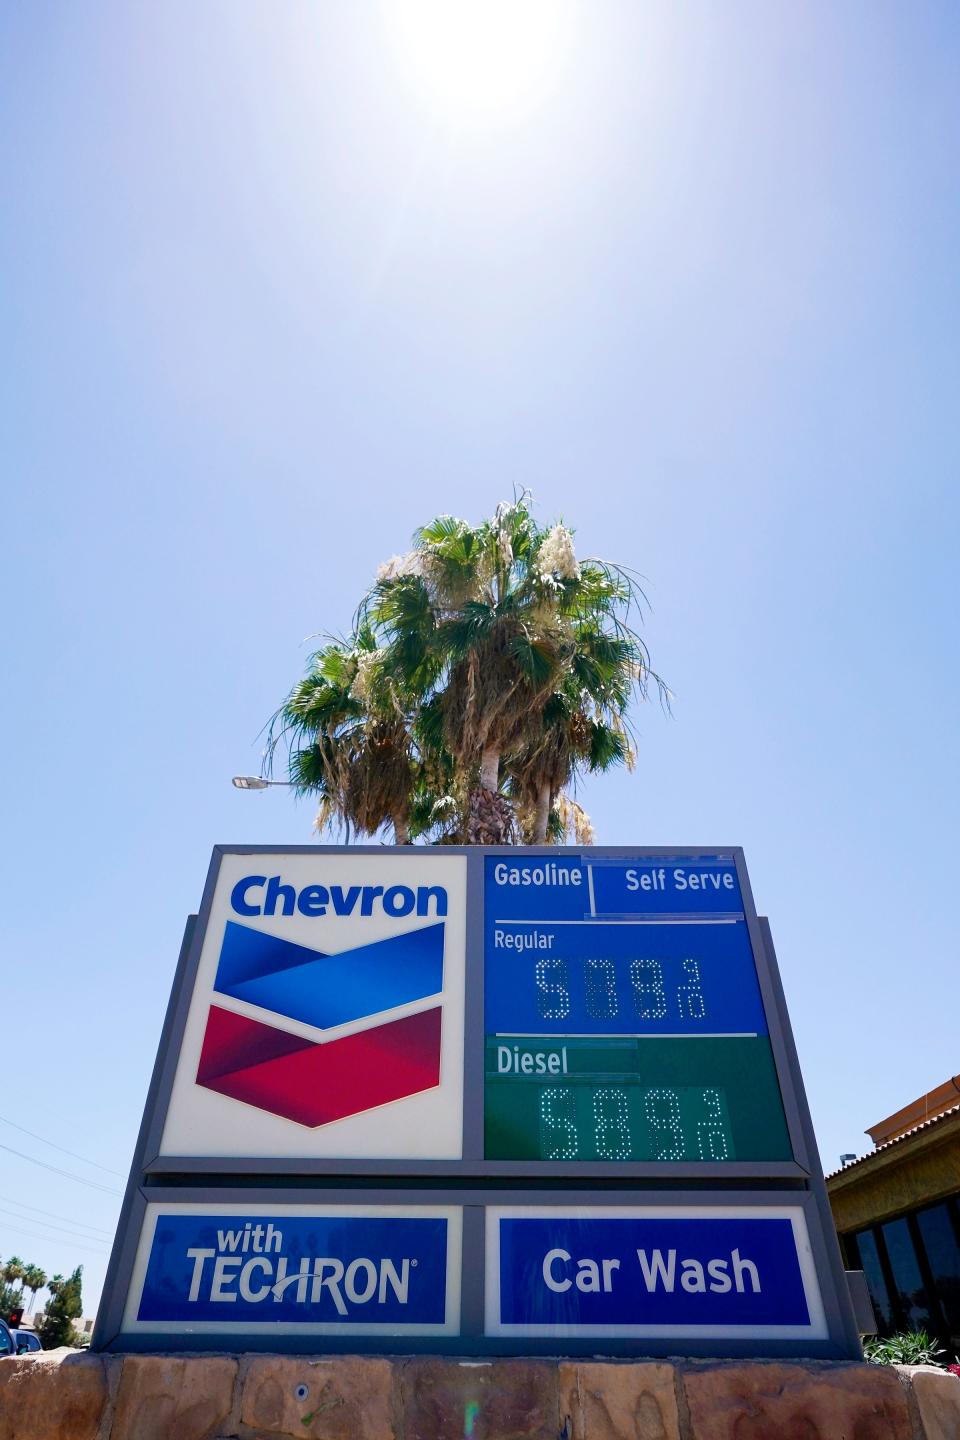 Gas prices continue to skyrocket in Arizona, as this gas station shows a typical price to pay for gas Tuesday, June 7, 2022, in Phoenix.